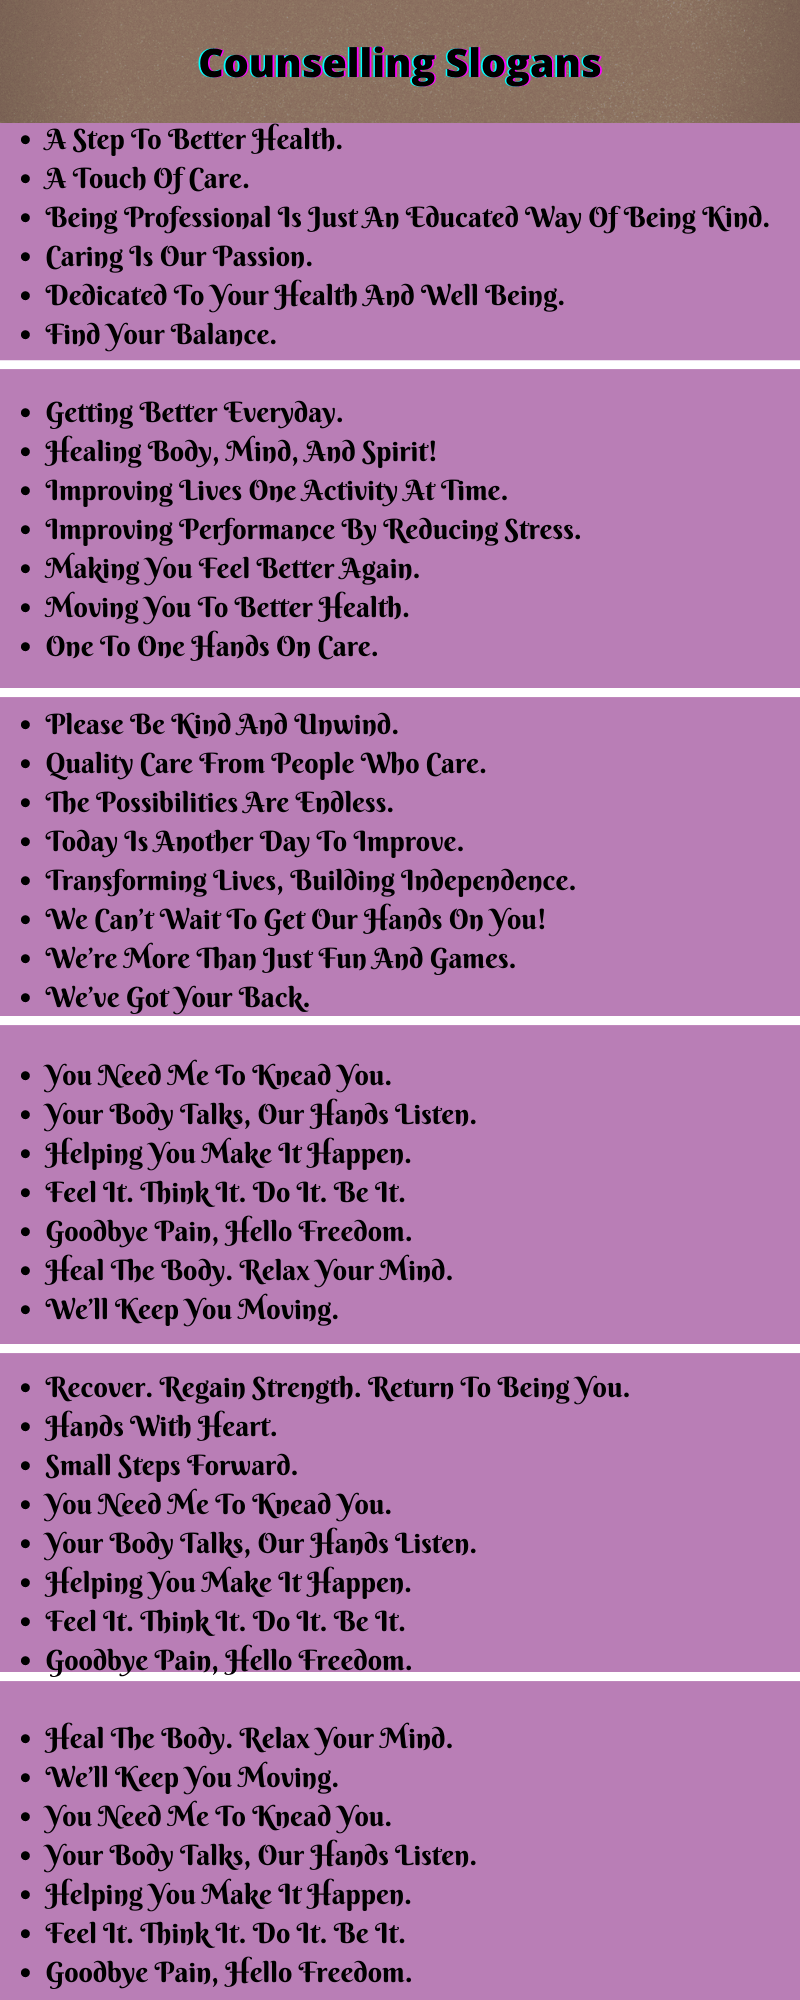 Counselling Slogans 